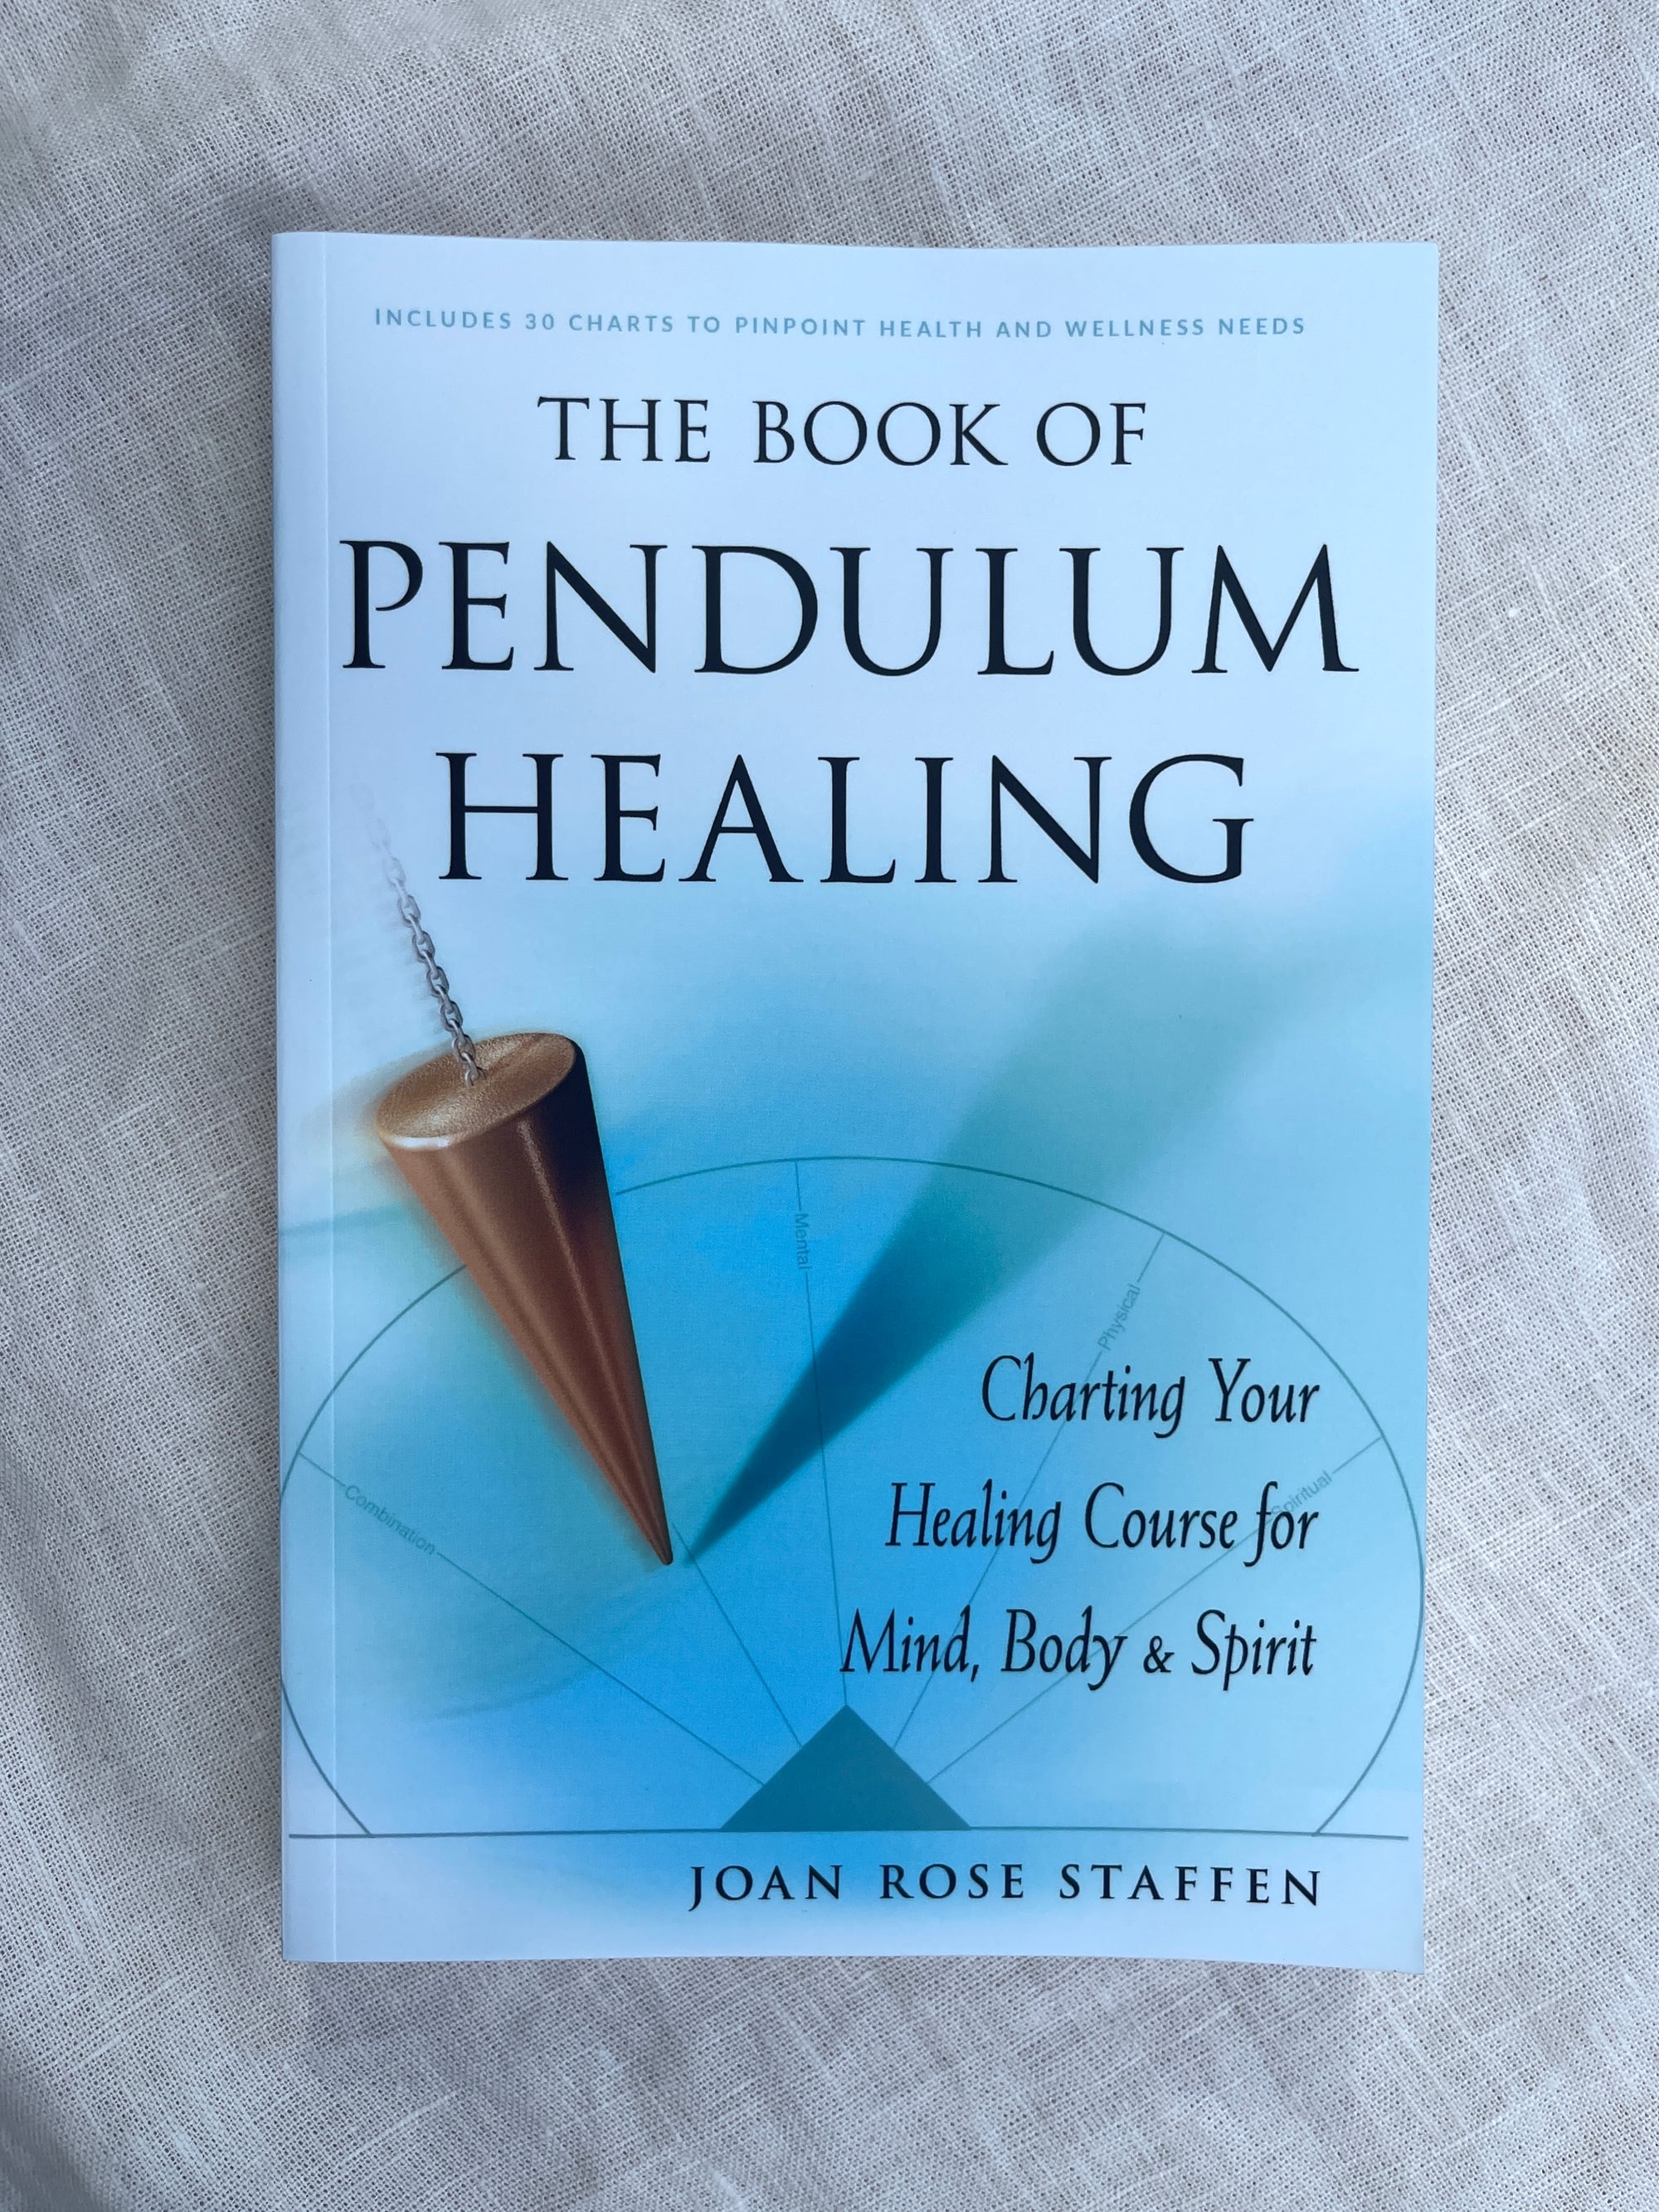 The Book of Pendulum Healing charting your healing course for mind, body, and spirit